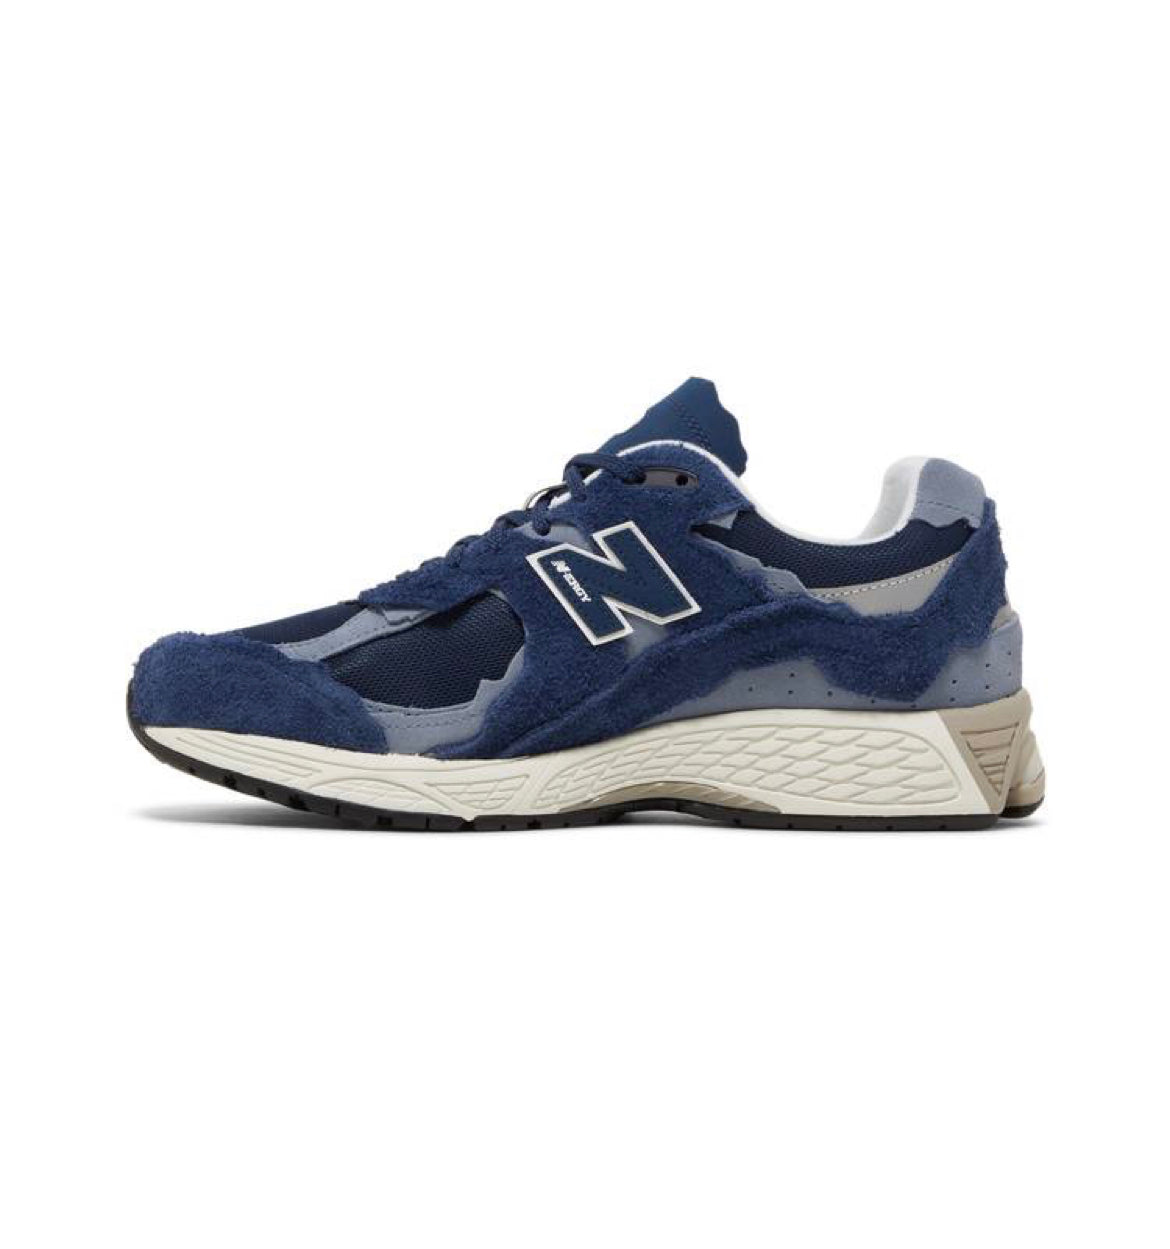 NB 2002R Protection Pack ‘Navy Grey’ M2002RDK